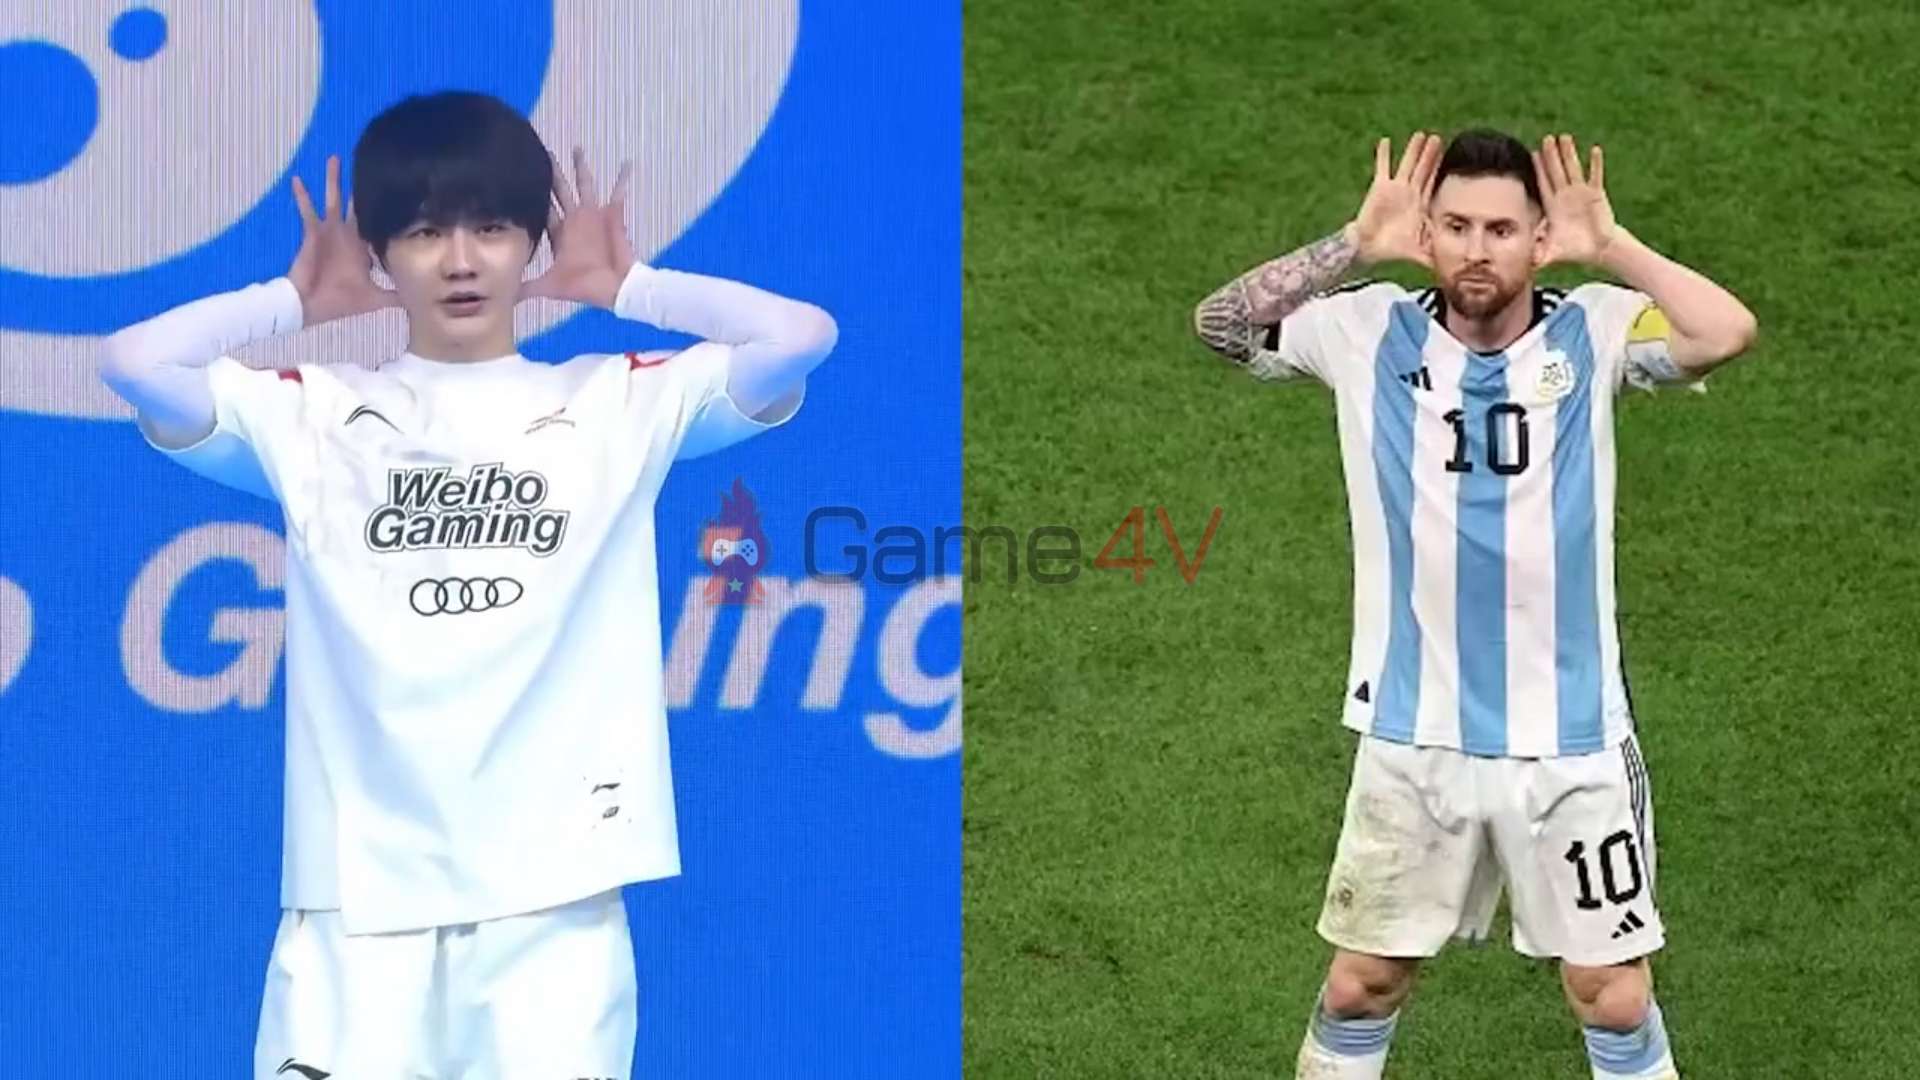 LPL made fans excited when players learned how to greet the pitch from Genshin Impact, Messi, Tom and Jerry,…